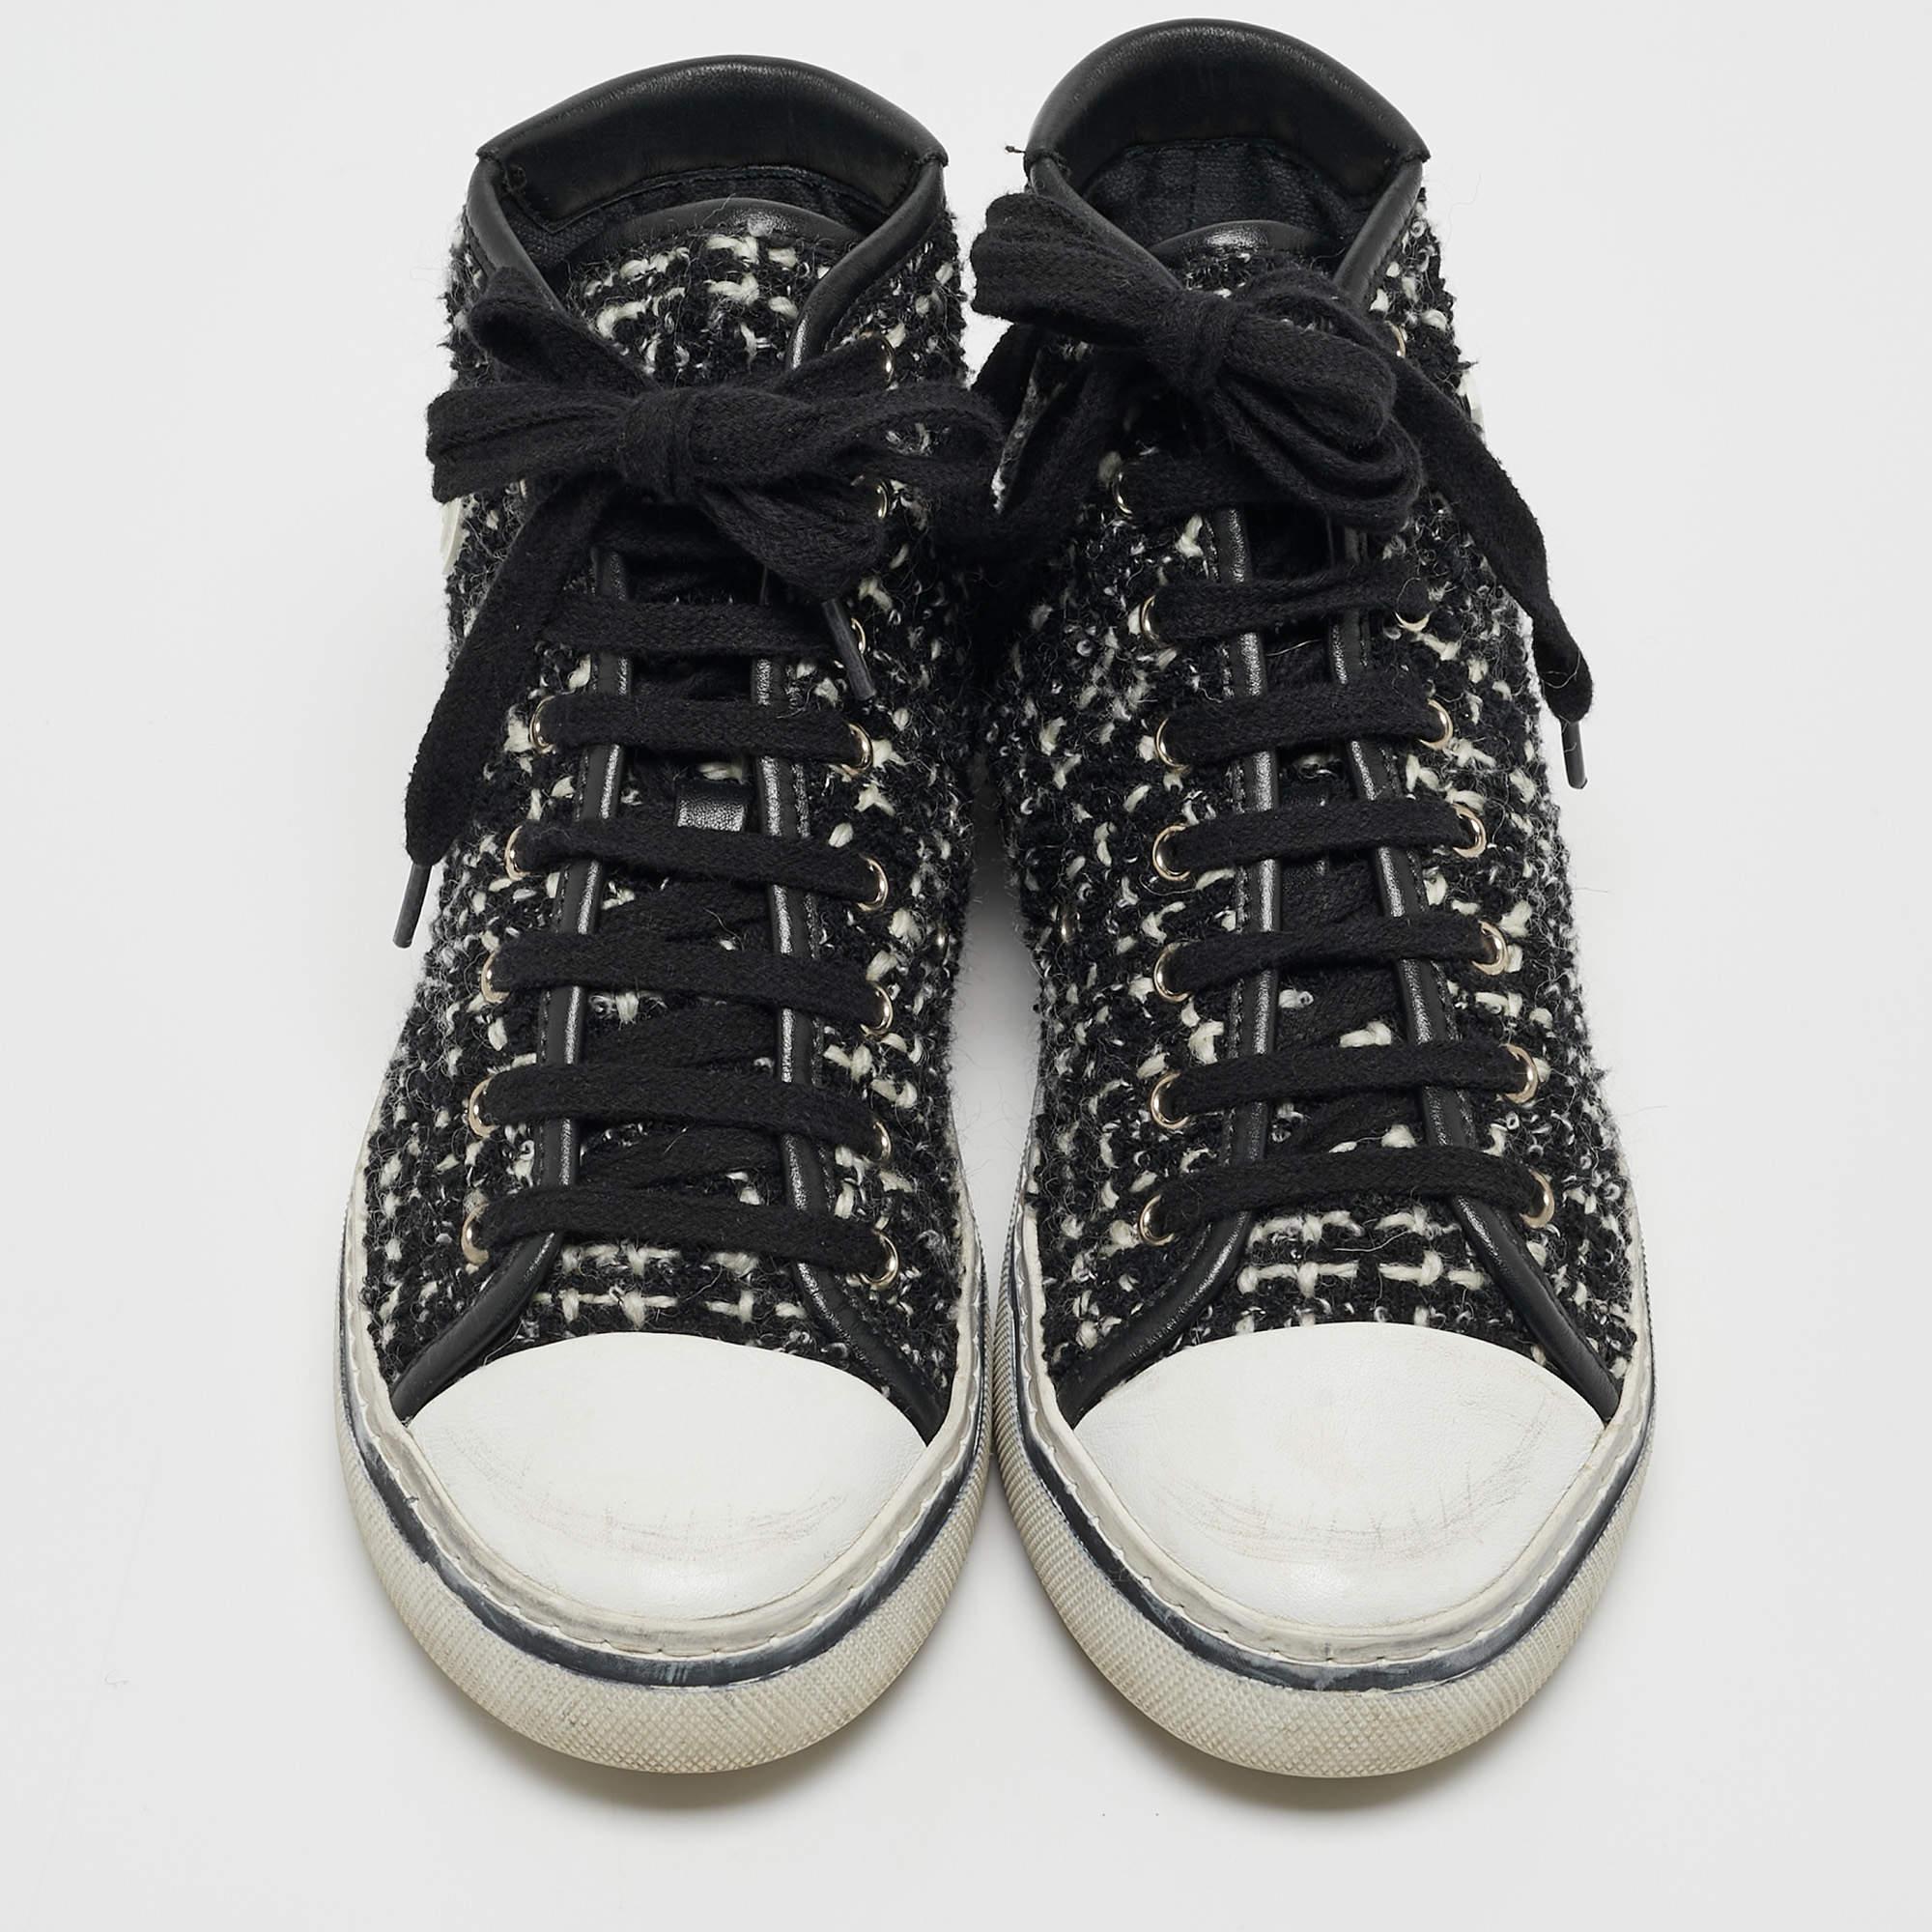 Saint Laurent White/Black Tweed and Leather Bedford High Sneakers Size 36 In Fair Condition For Sale In Dubai, Al Qouz 2